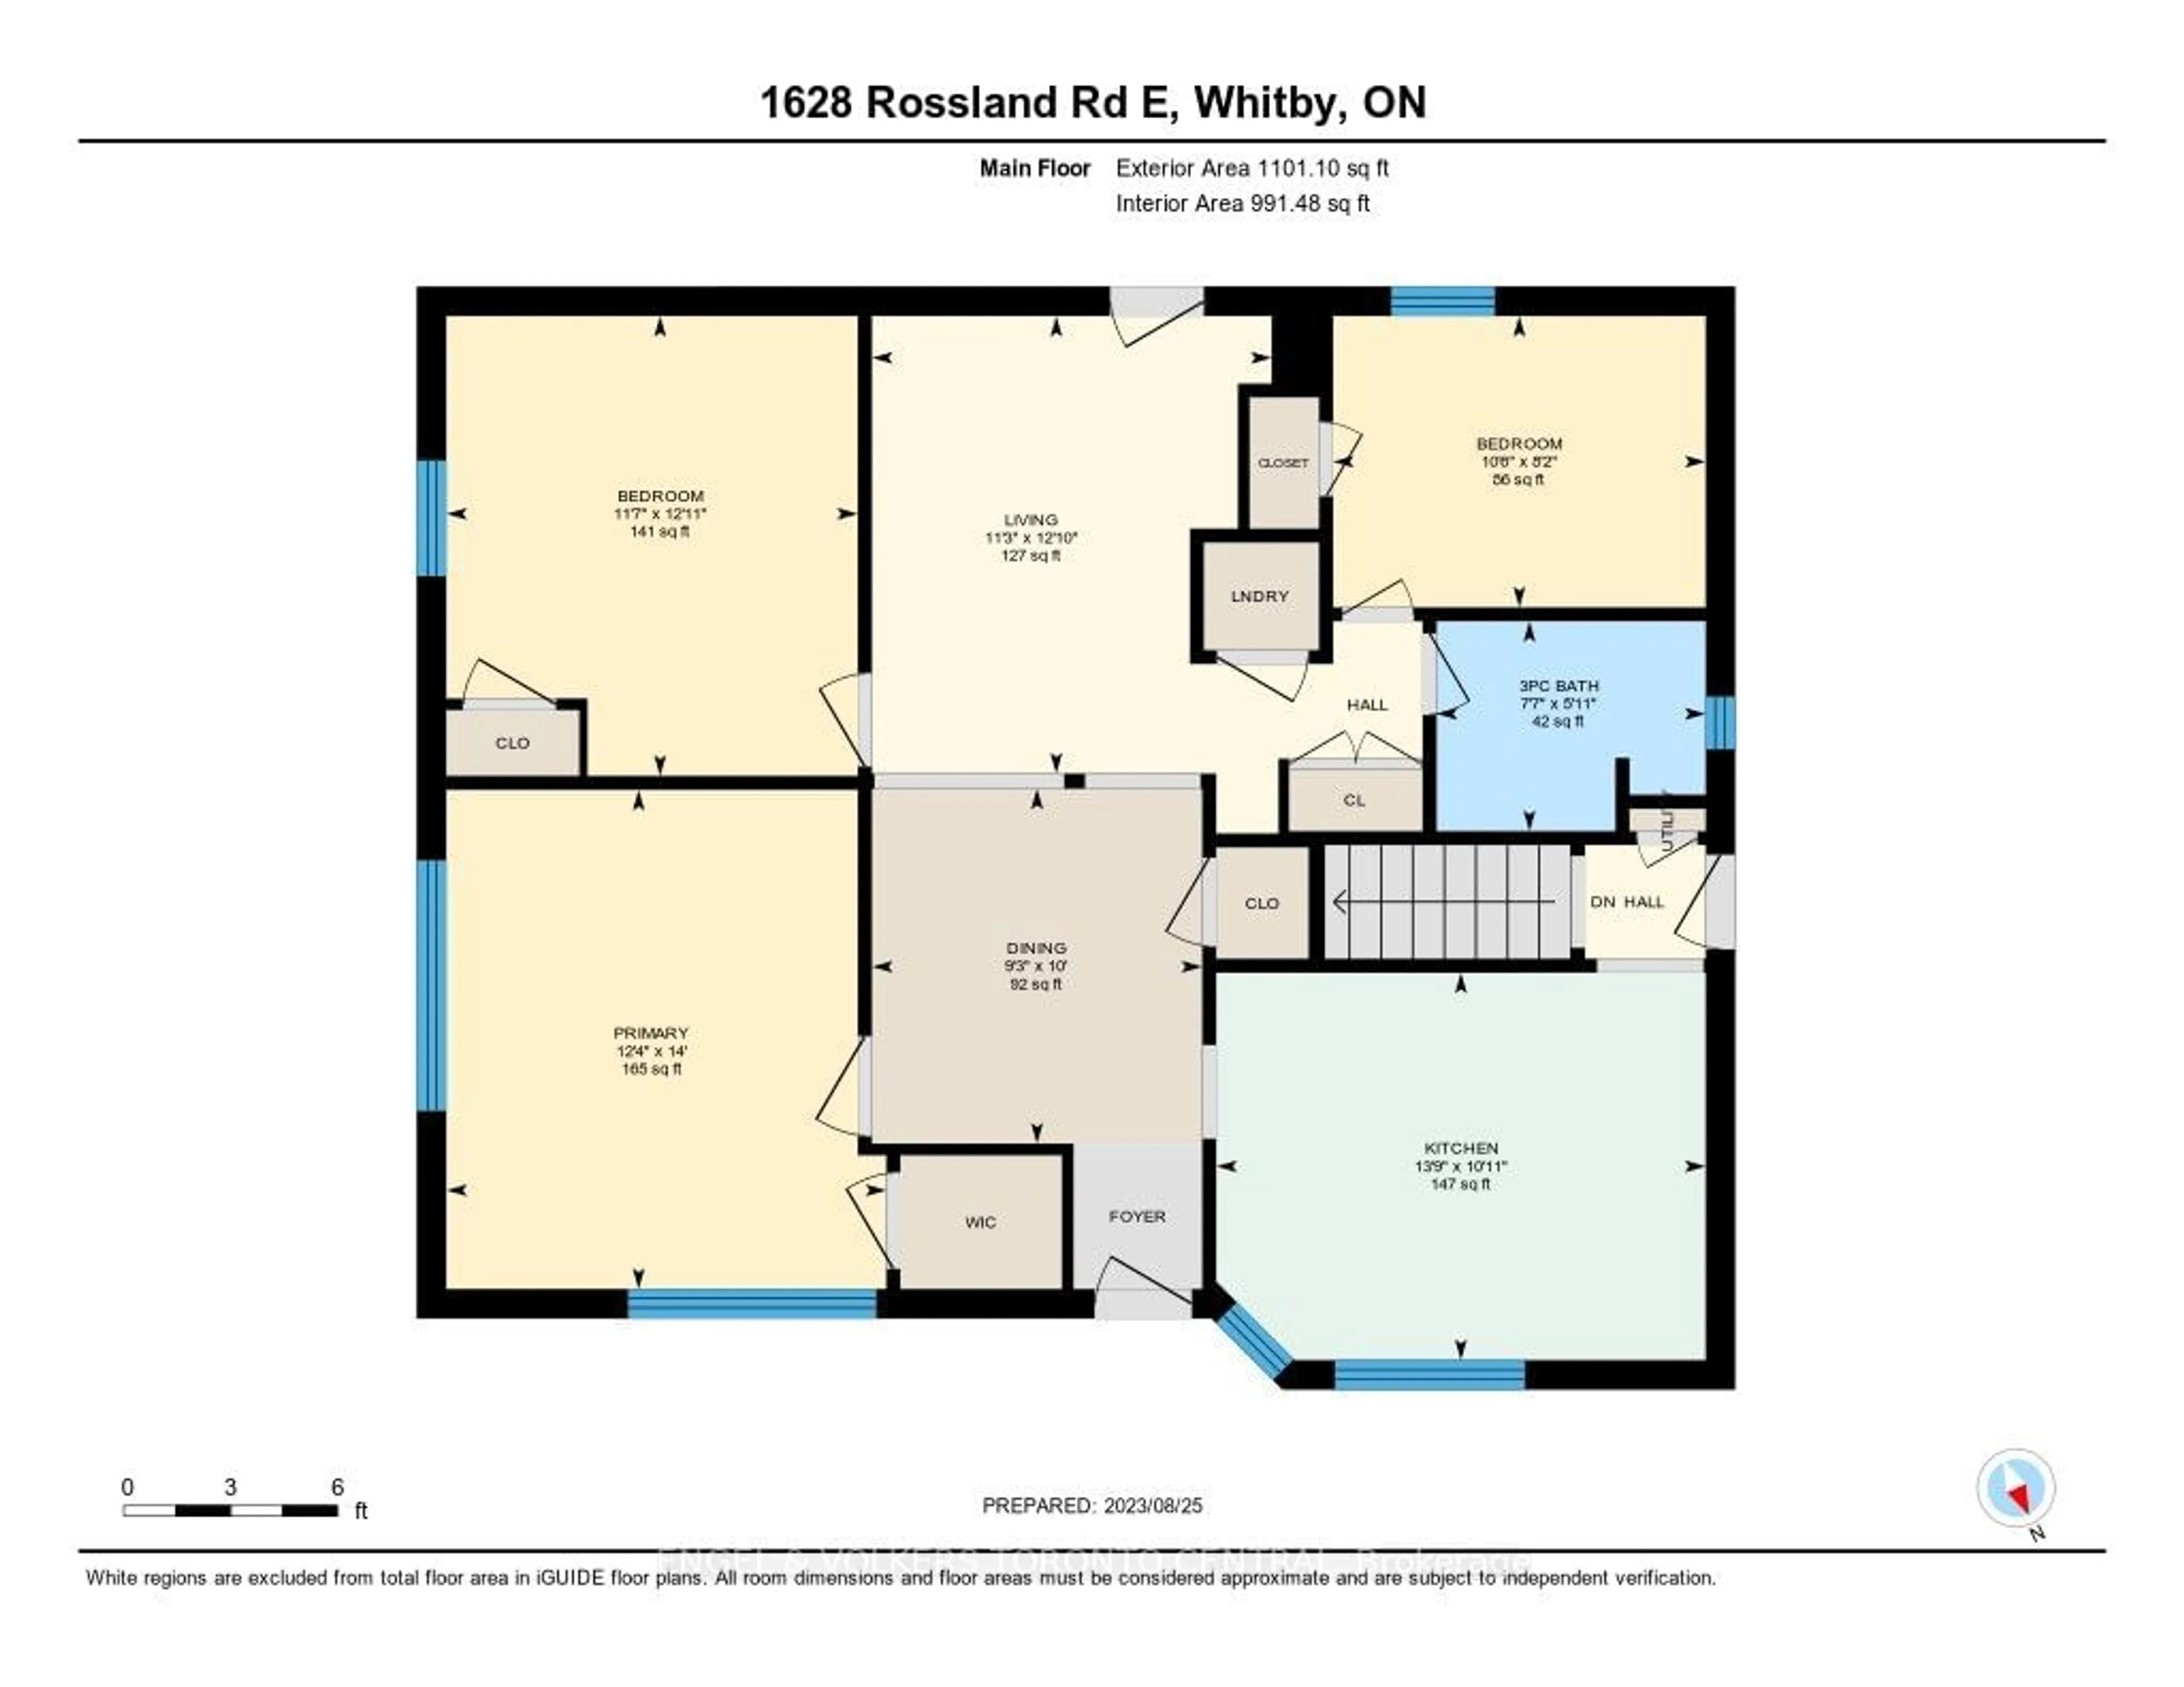 Floor plan for 1628 Rossland Rd, Whitby Ontario L1N 9Y3